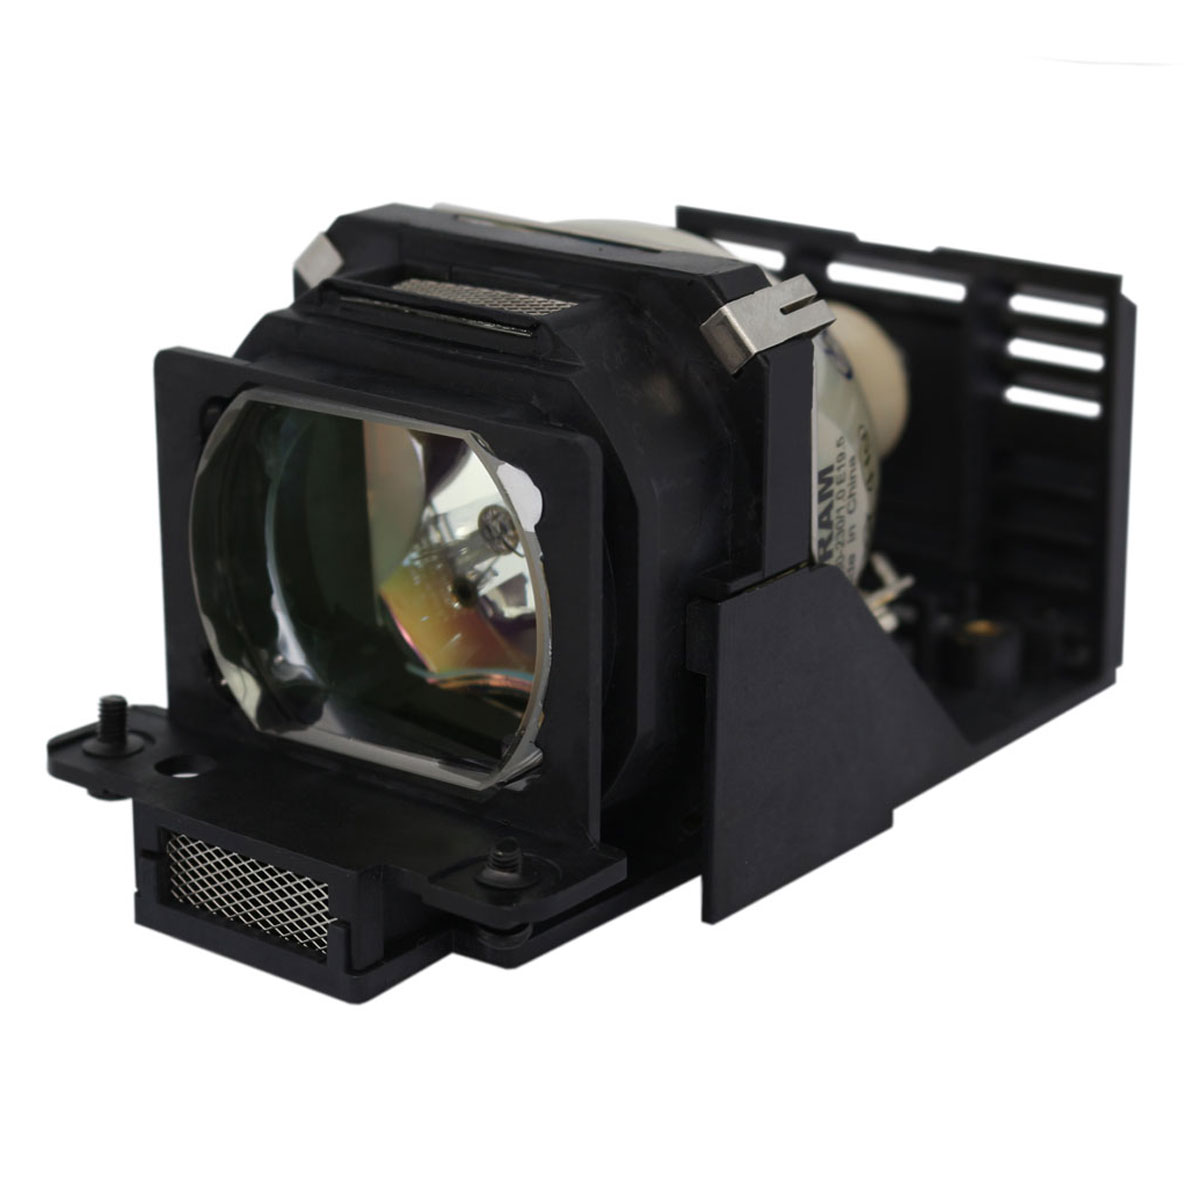 Buyquest EX1  OEM Replacement Projector Lamp for Sony. Includes New Philips UHP 165W Bulb and Housing